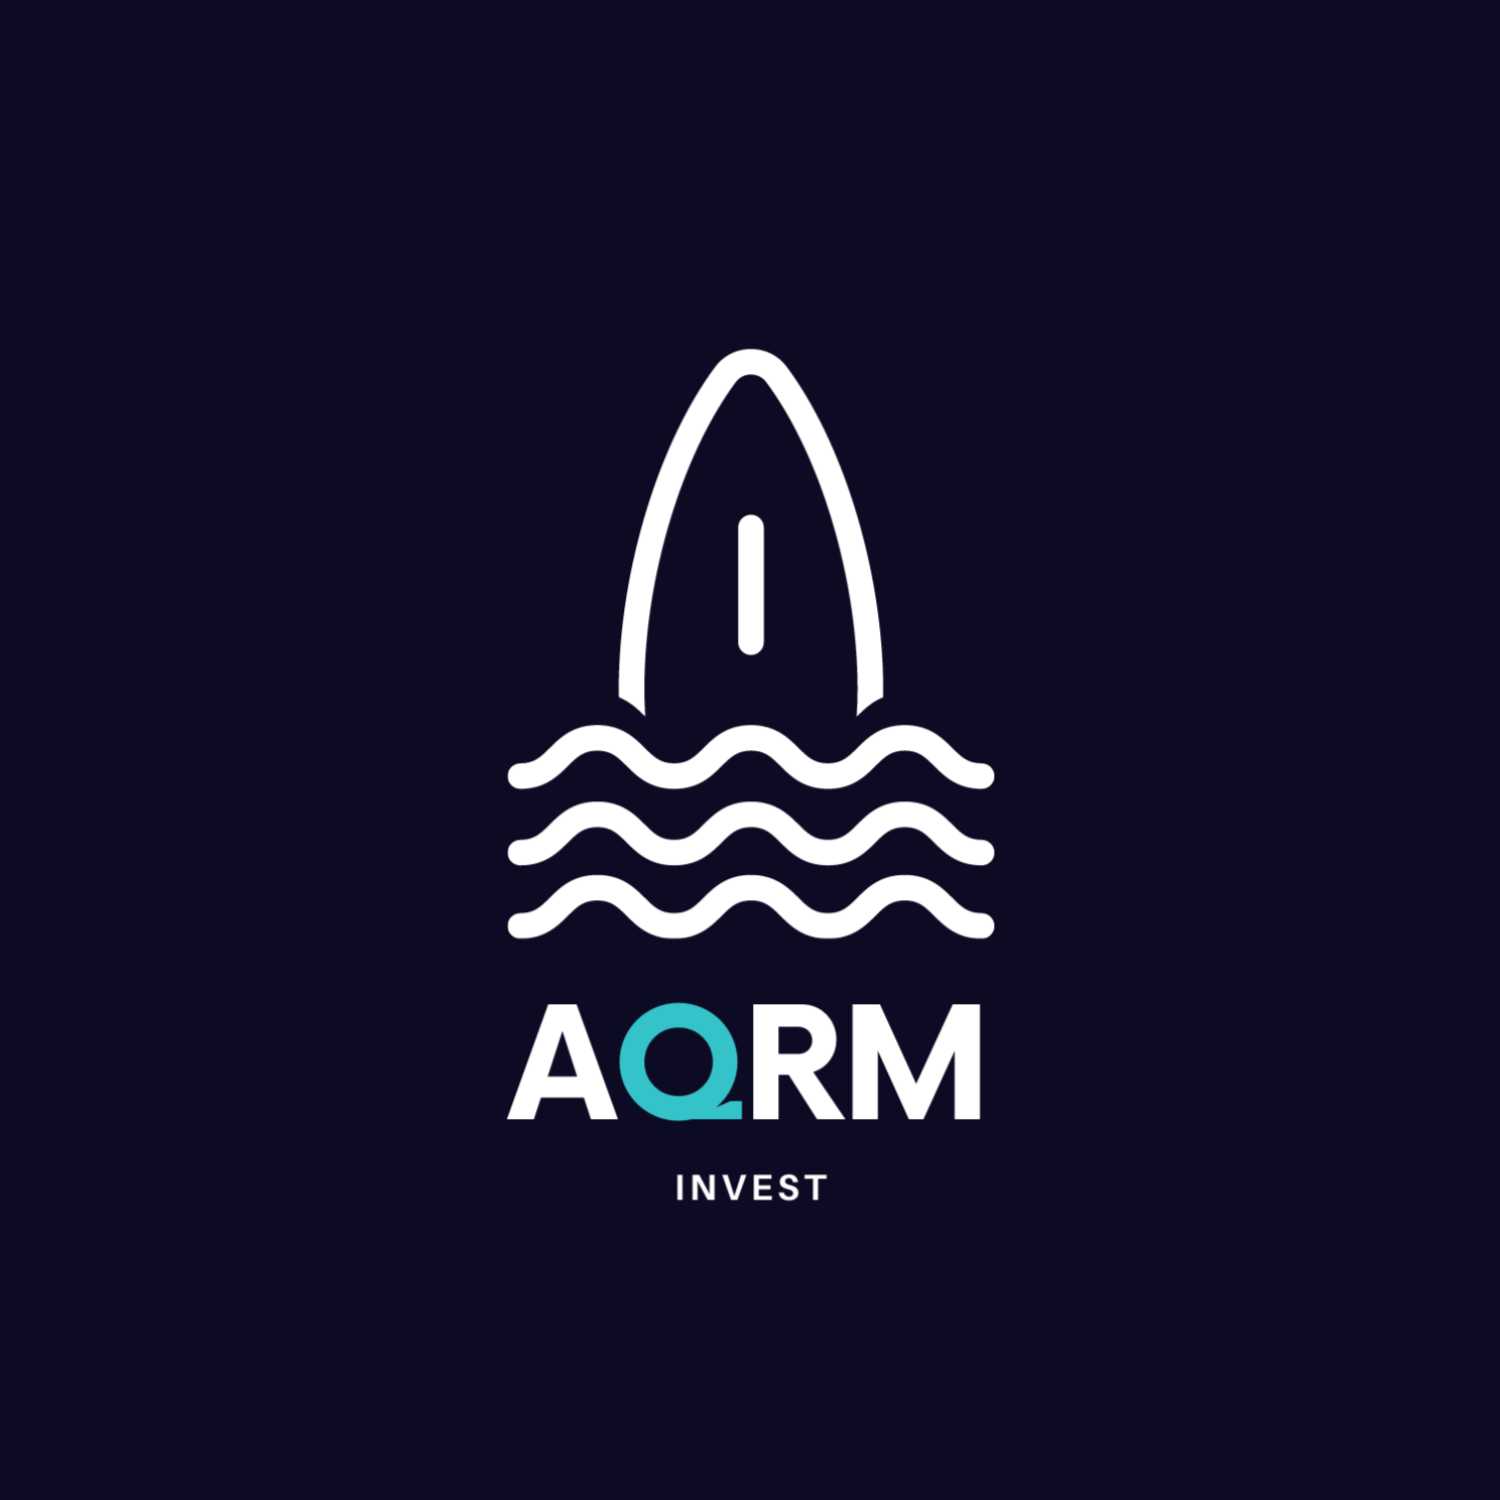 AQRM invest